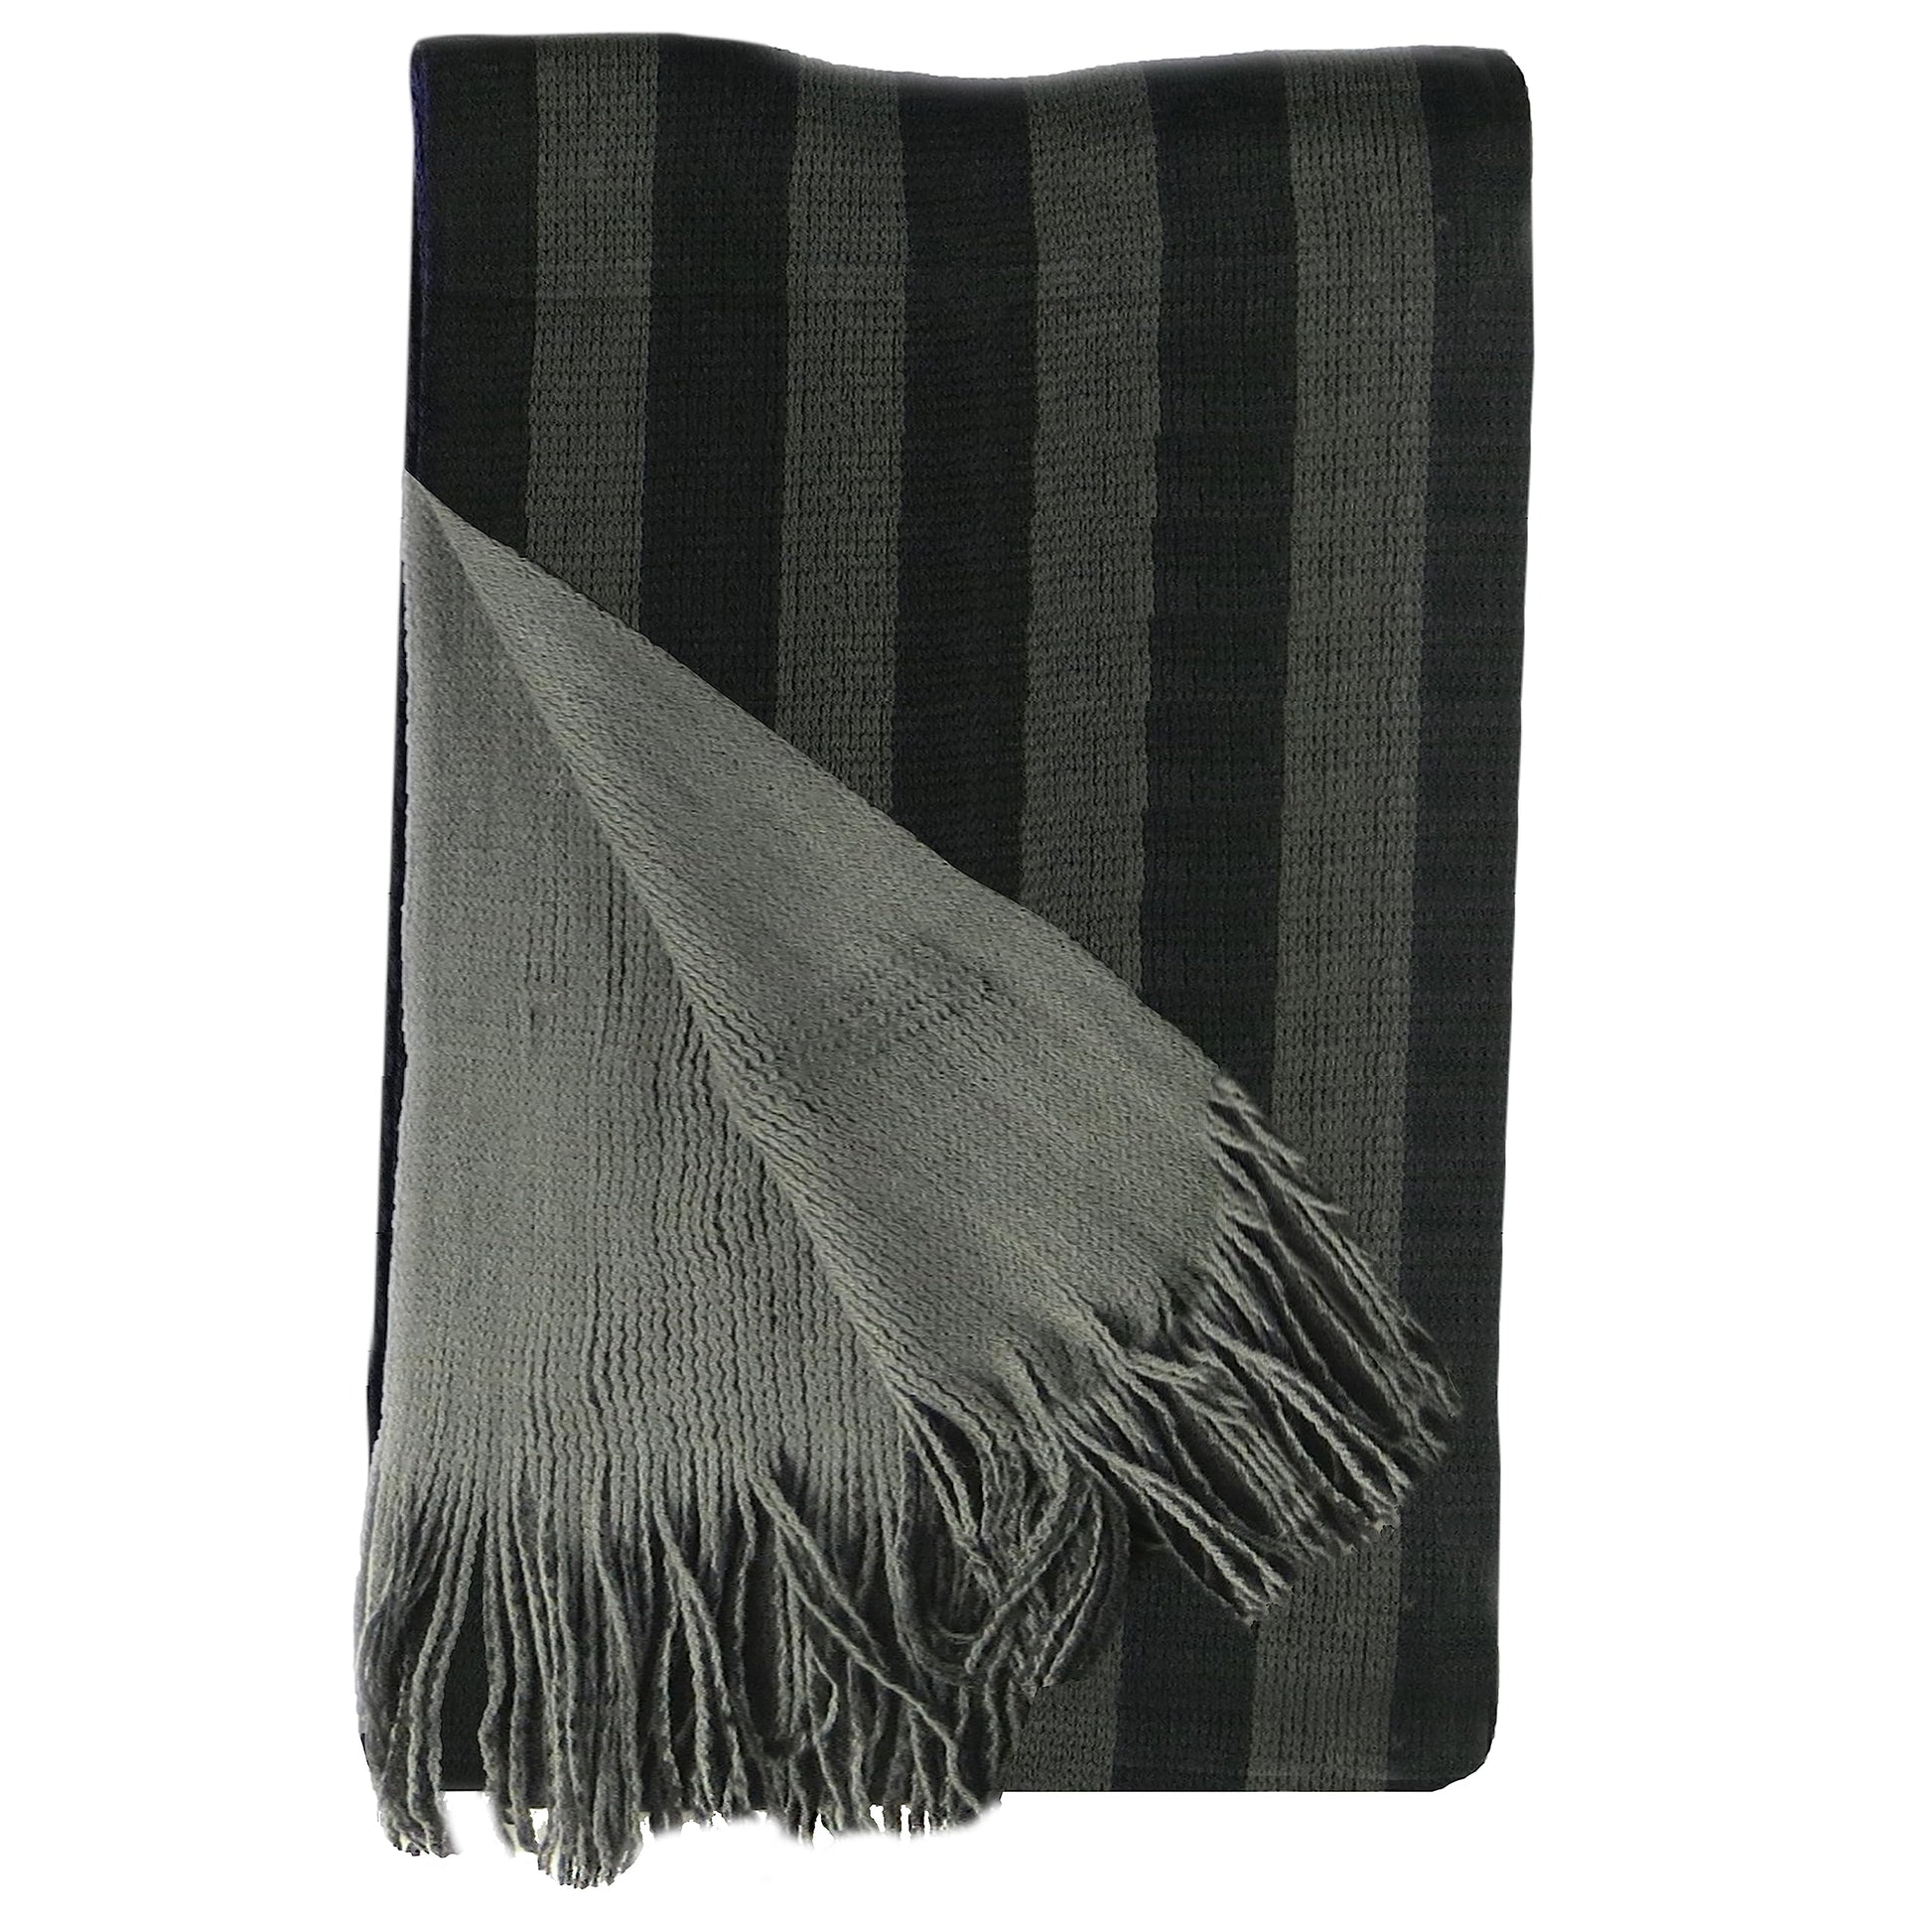 Men's Scarves In 3 Colours Reversible Stripe Design Soft Woven Scarf. Buy now for £7.00. A Scarves by Sock Stack. accessories, accessory, black, casual, comfortable, green, grey, Men, mens, One Size, Out of stock, outdoor, purple, Reversible, Scarf, Scarf